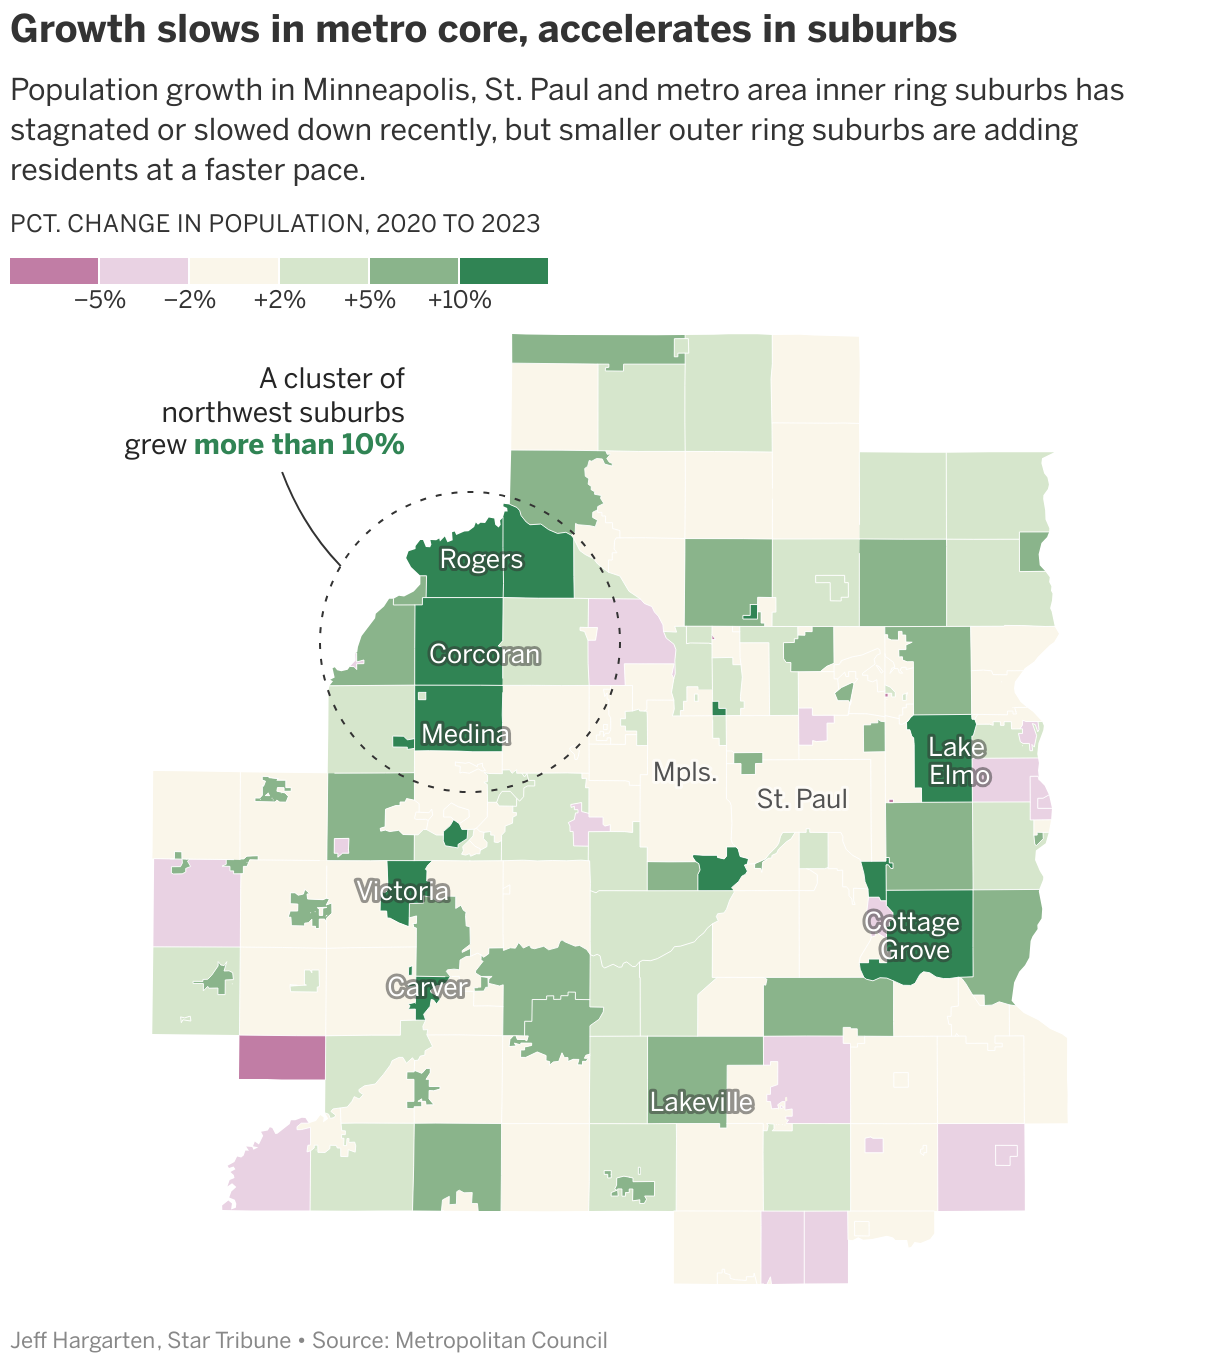 A choropleth map of cities in the five-county metro area shows that cities with the highest growth since 2020 are on the exurban fringe, while Minneapolis, St. Paul and several other inner-ring suburbs have had stagnant growth.